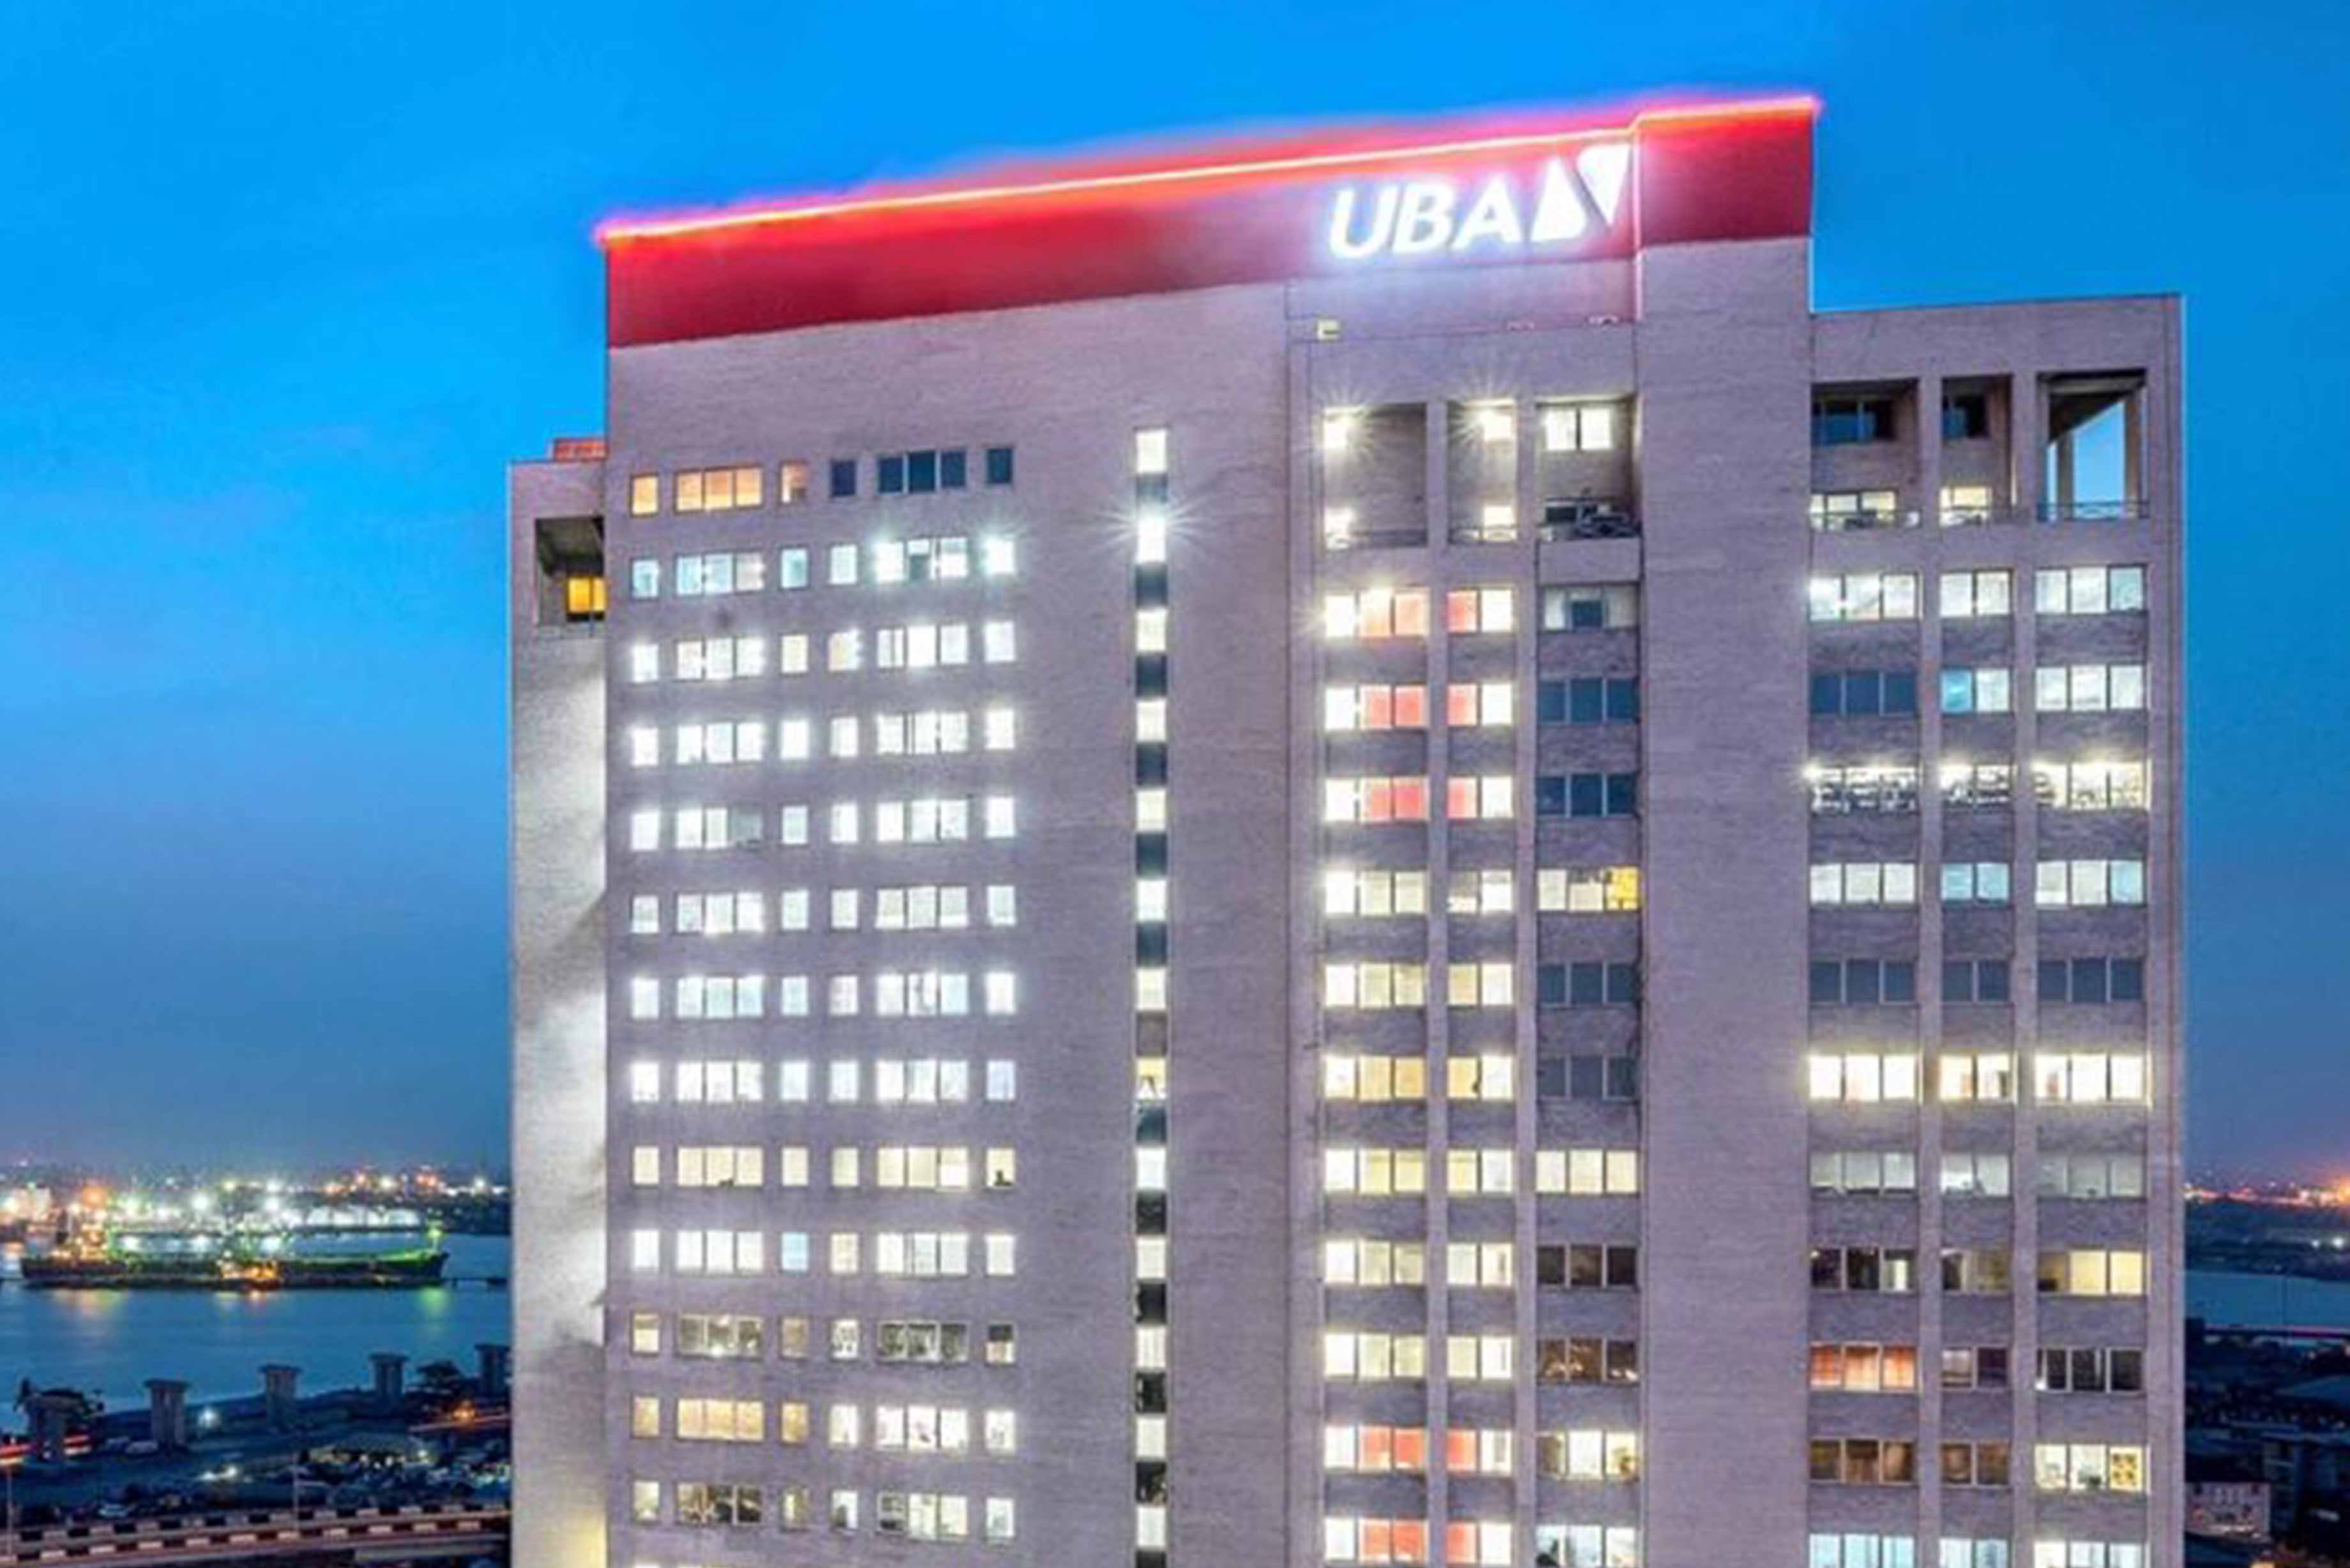 N3.7m Leaves UBA Customer's Account Without Her Knowledge